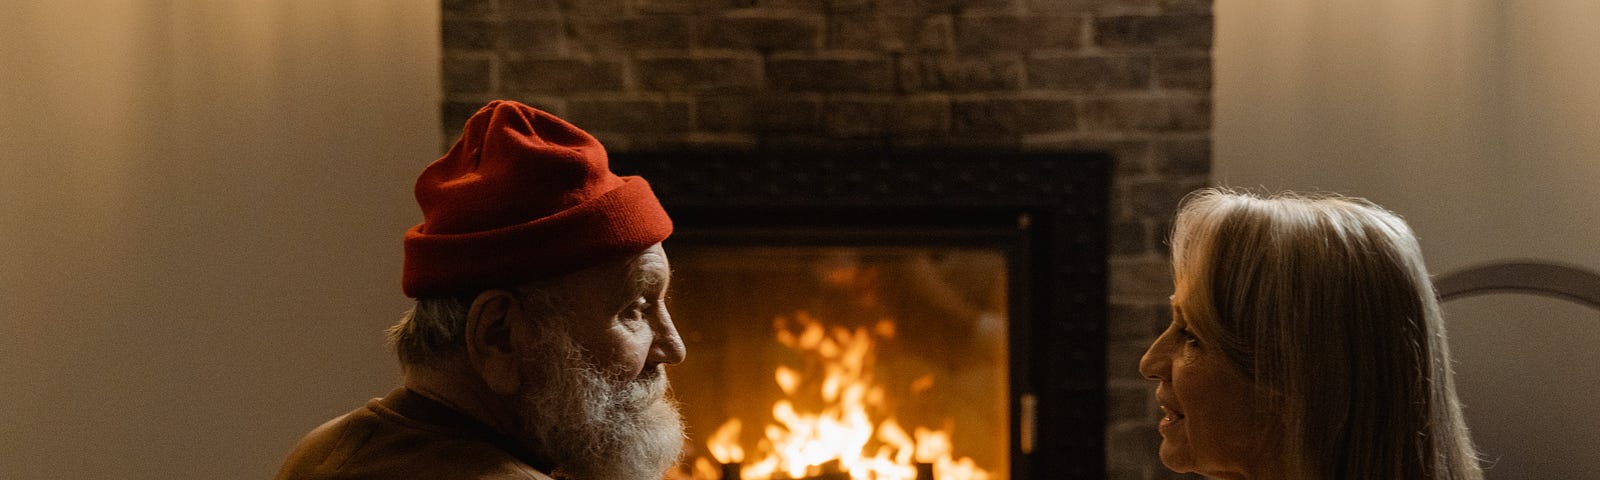 Man in red cap sits in front of a fire with a woman, with long blond hair. They talk.